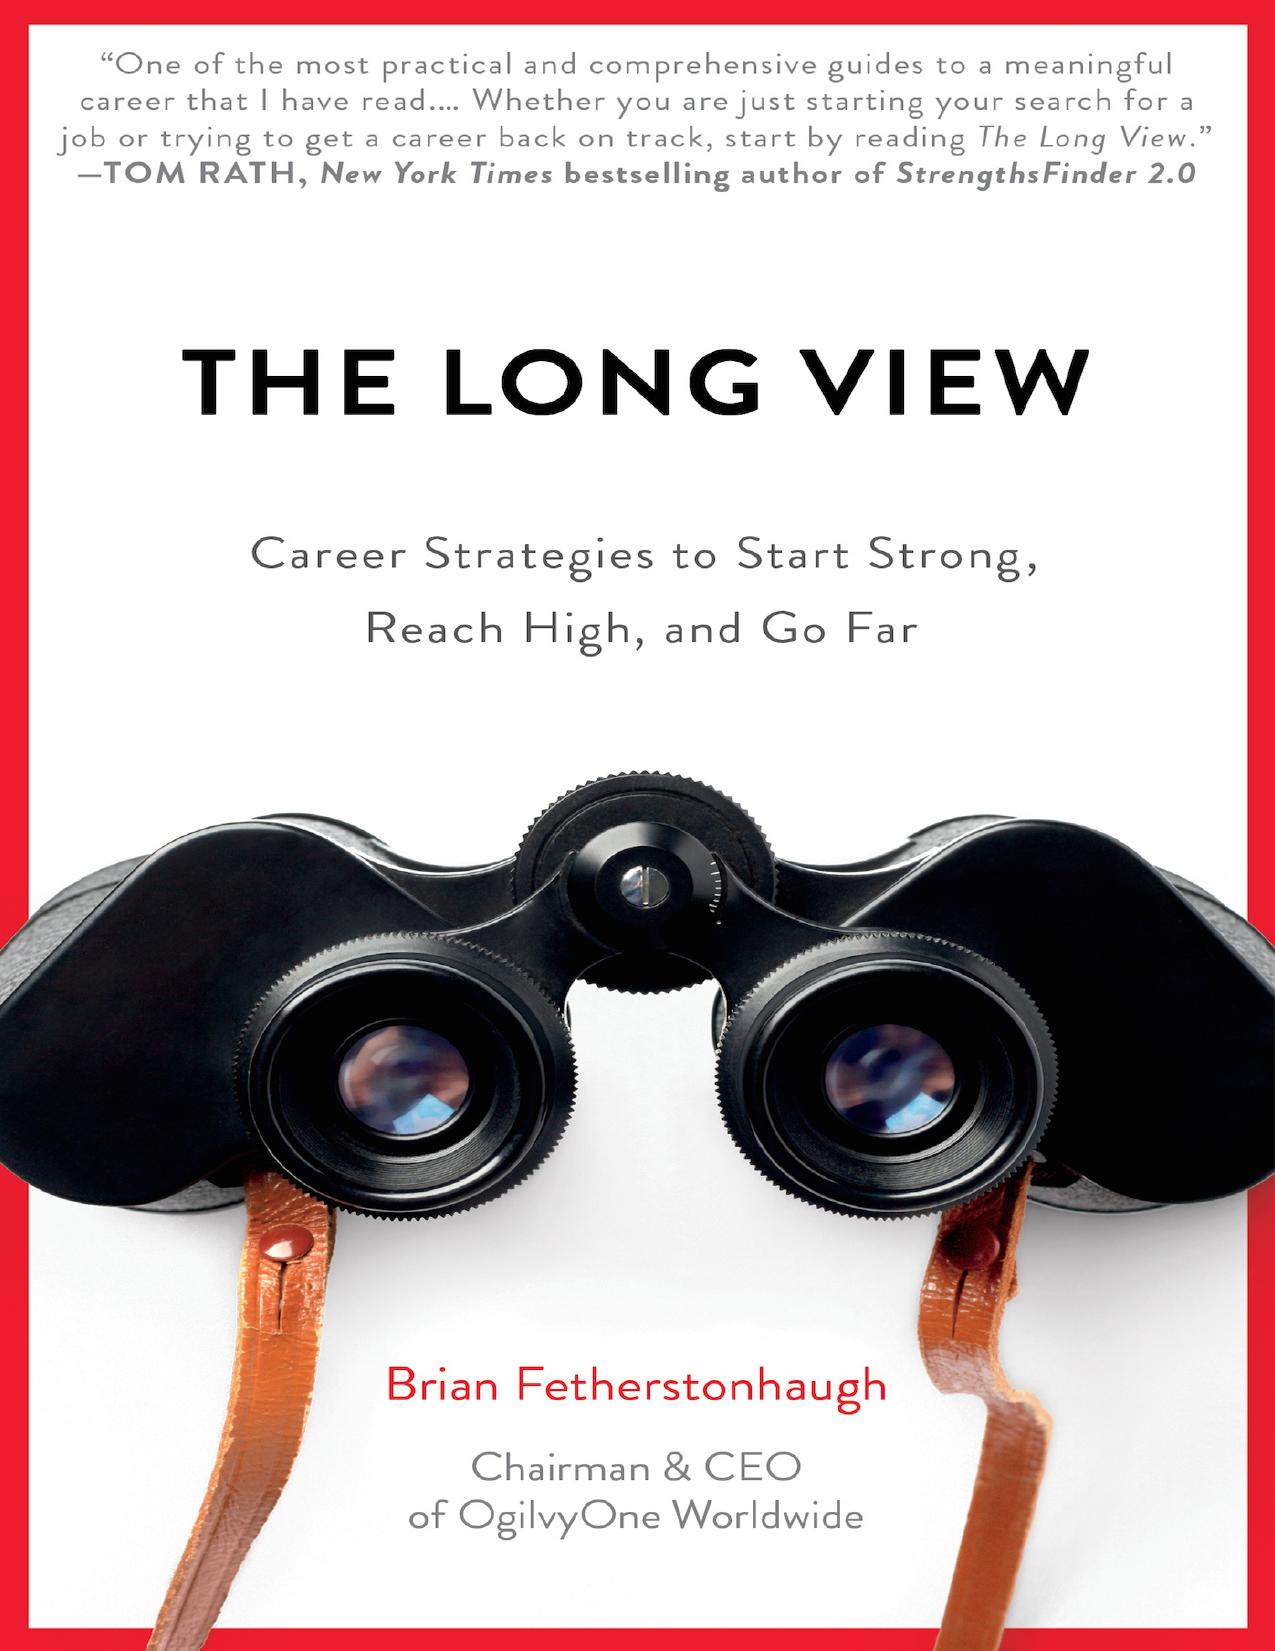 Long View - Brian Fetherstonhaugh, The.jpg